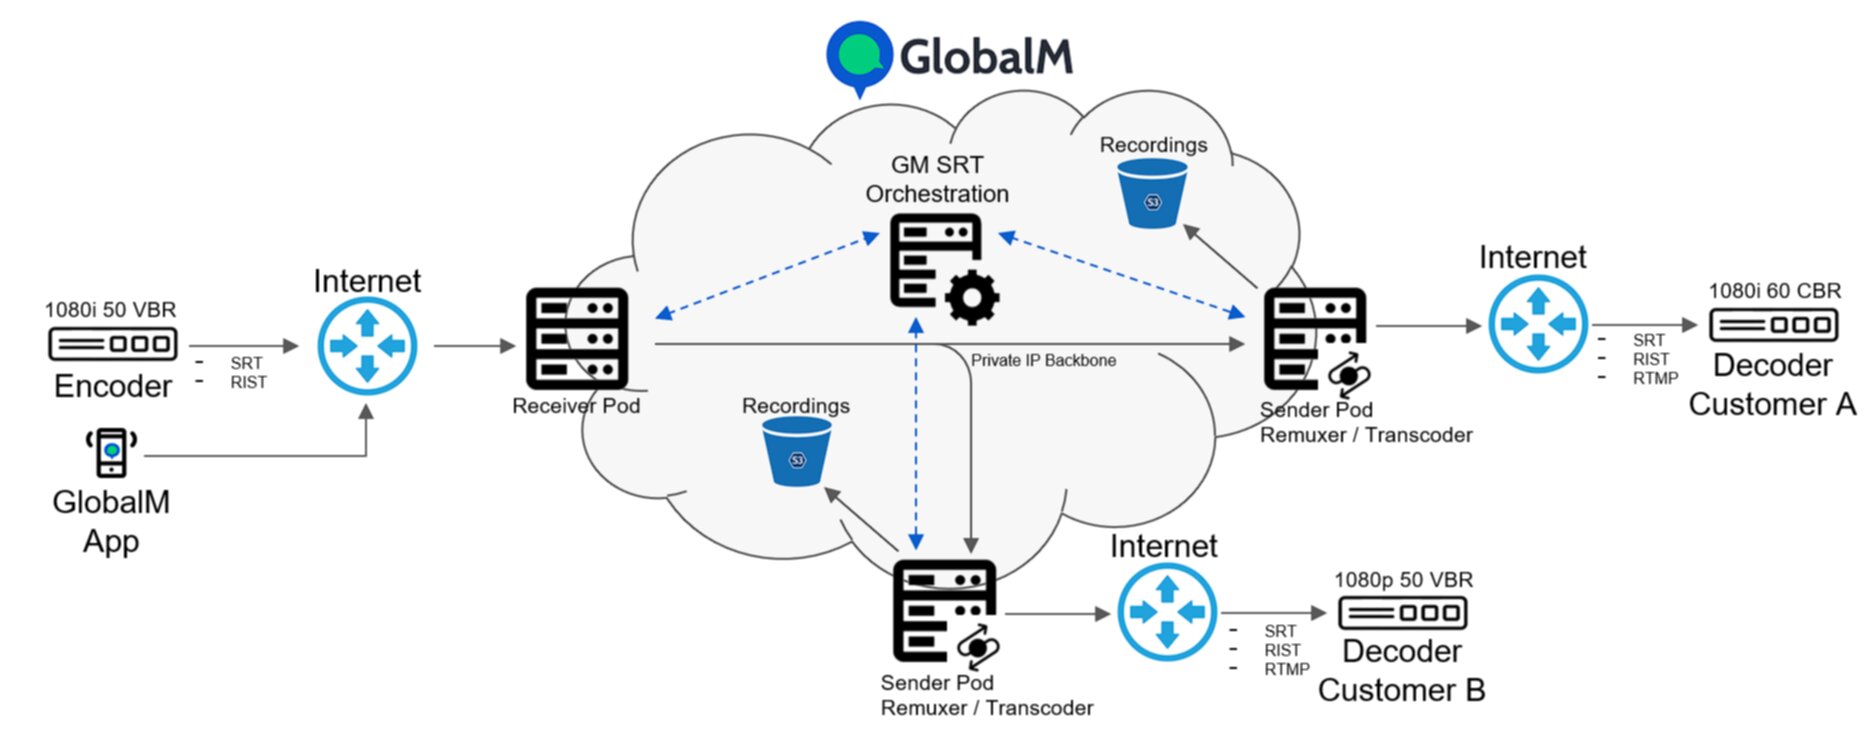 How GlobalM works